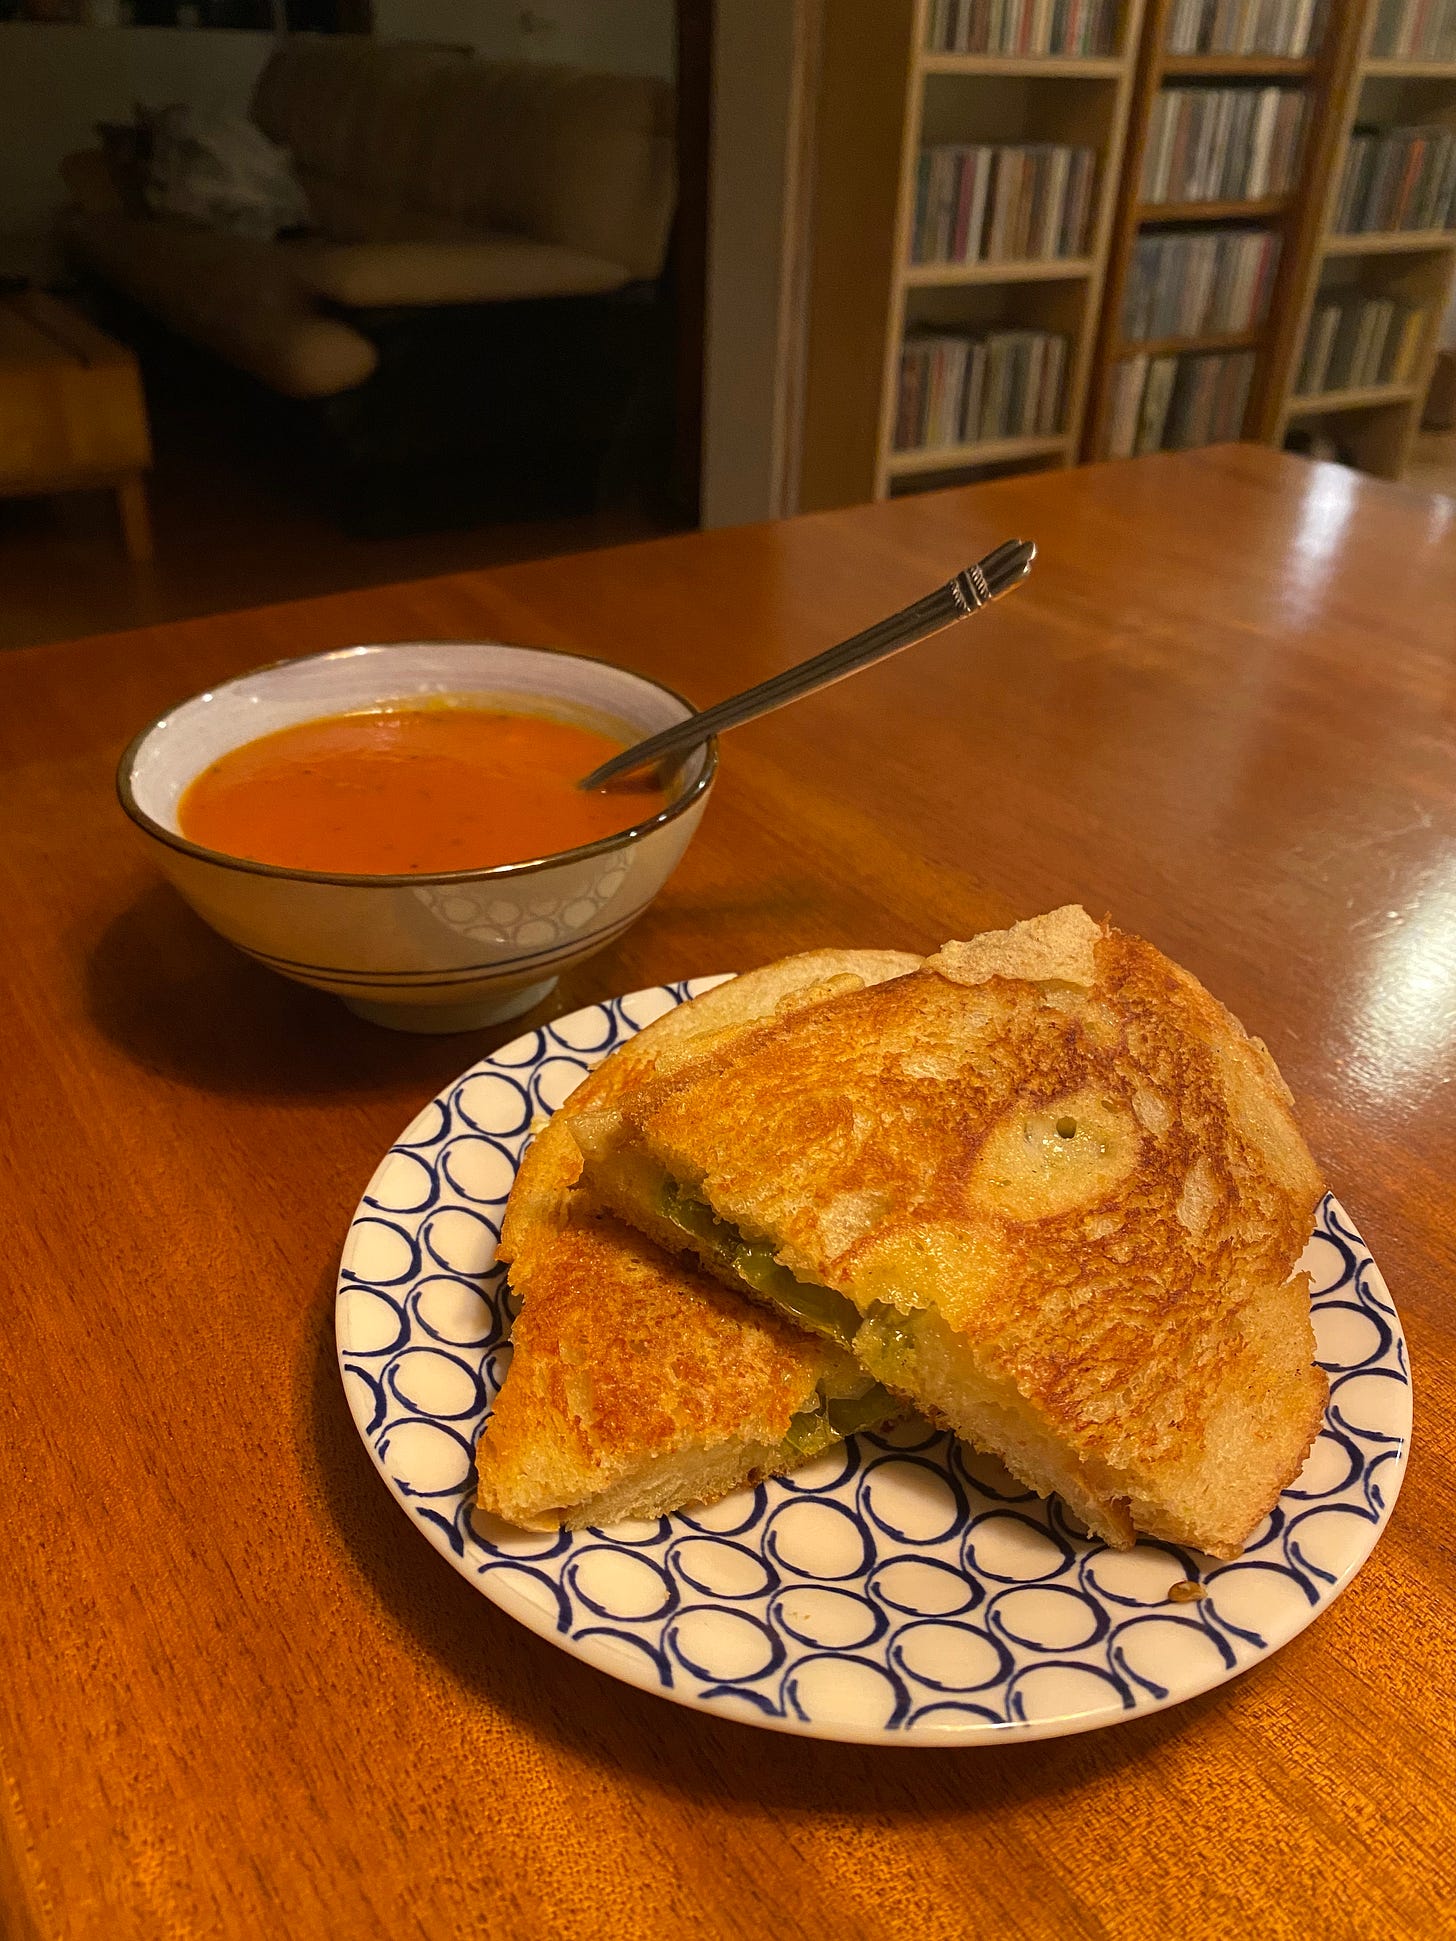 A grilled cheese sandwich with shishito peppers on white sourdough, cut in half on a small plate. Behind it is a little bowl of tomato soup with a spoon sticking out of it.